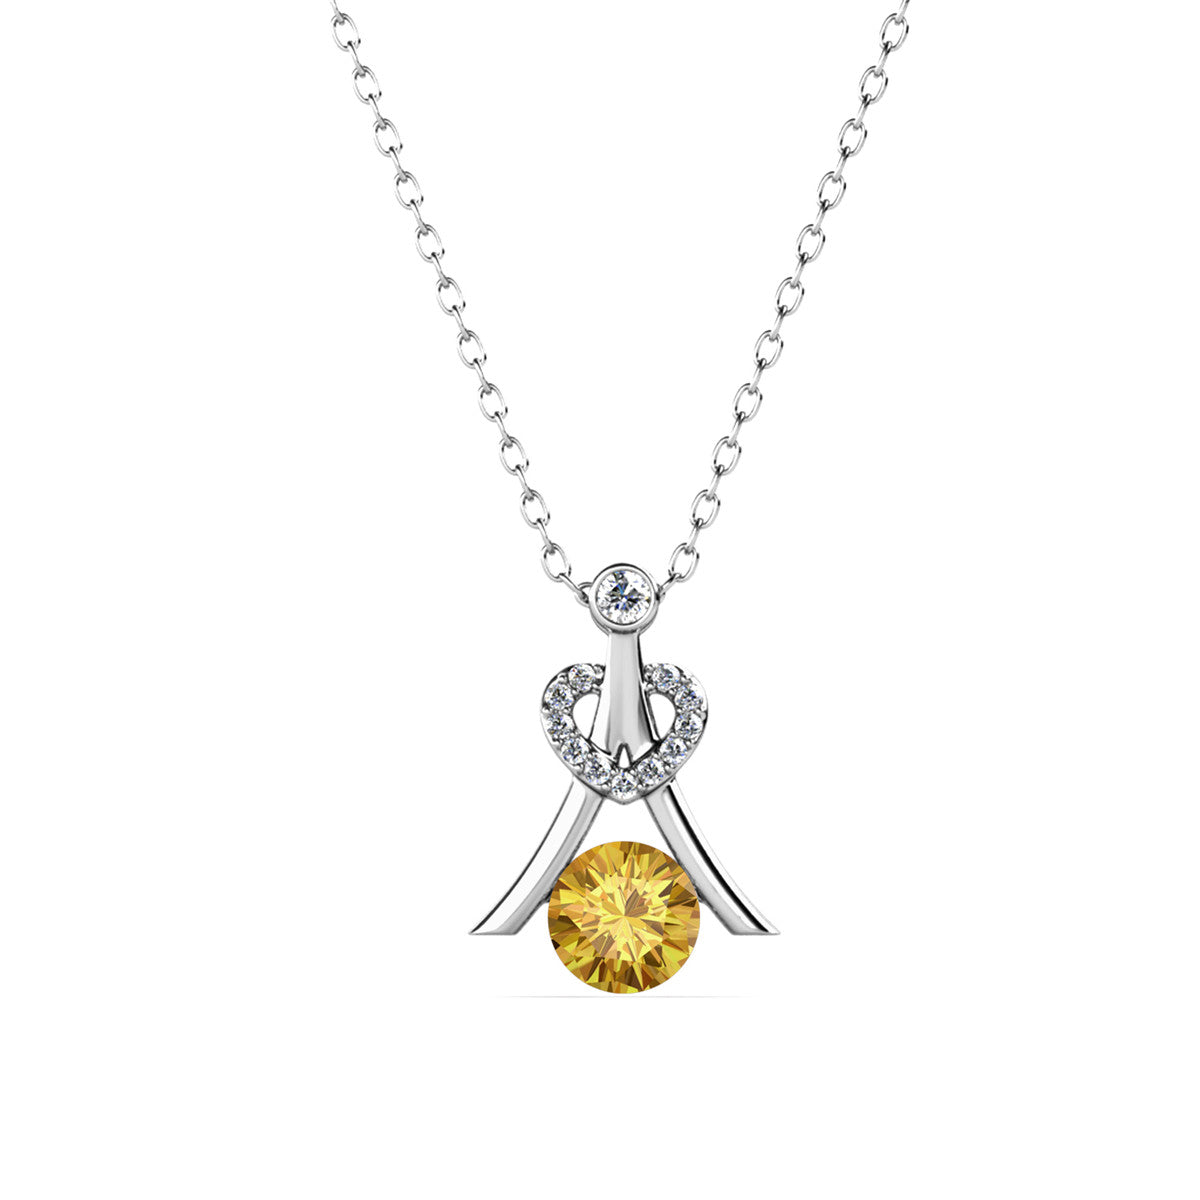 Serenity November Birthstone Citrine Necklace, 18k White Gold Plated Silver Necklace with Round Cut Crystals